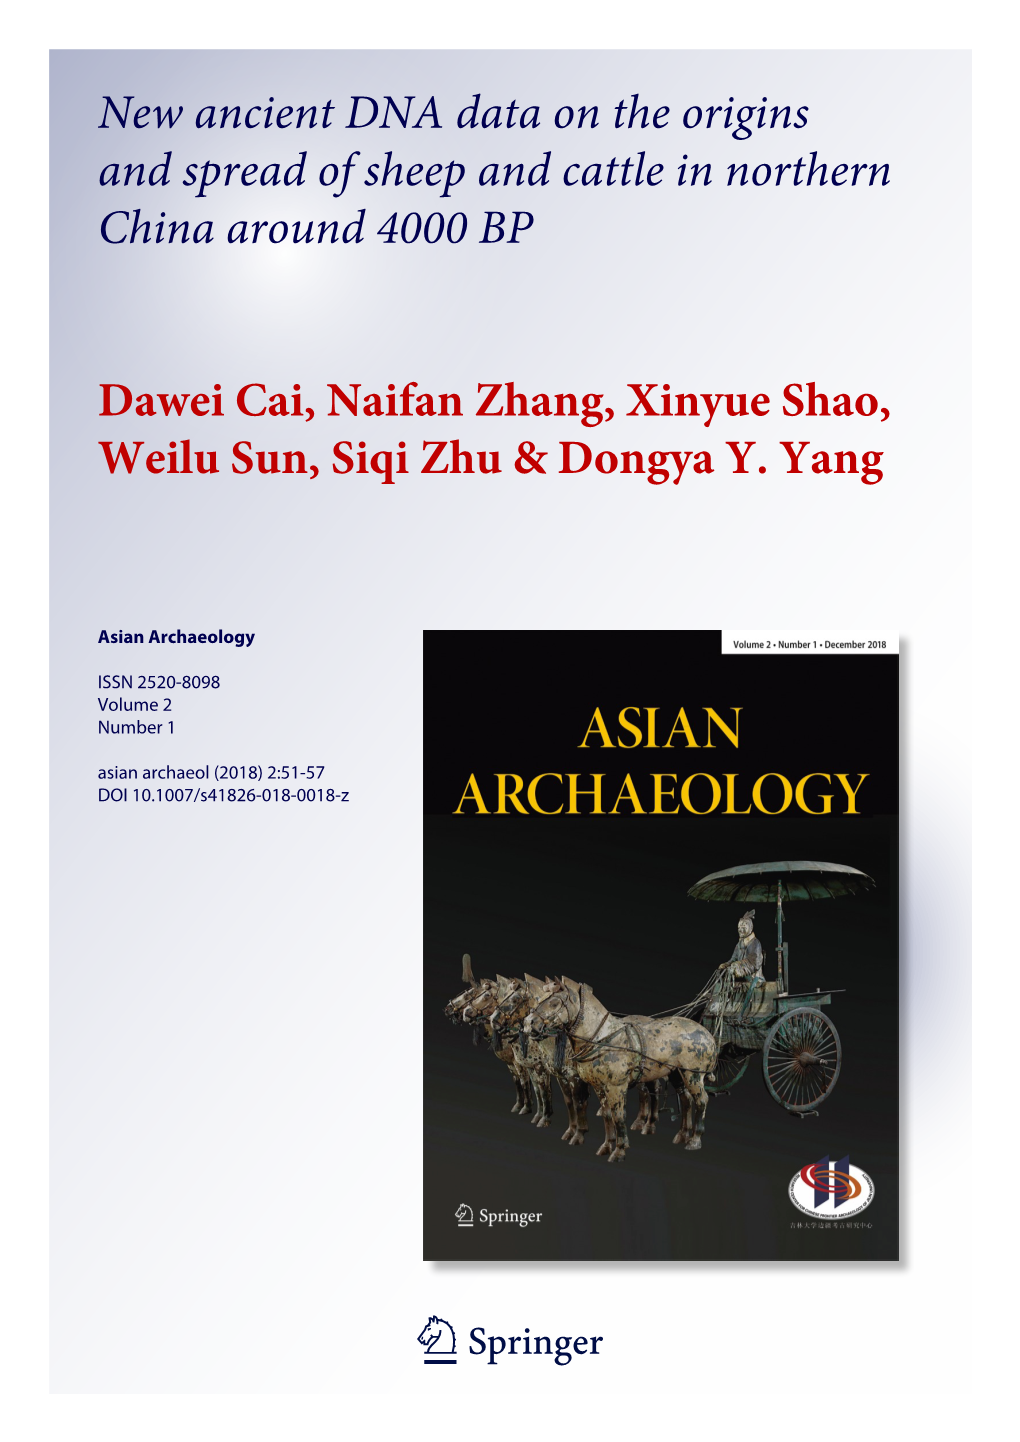 New Ancient DNA Data on the Origins and Spread of Sheep and Cattle in Northern China Around 4000 BP